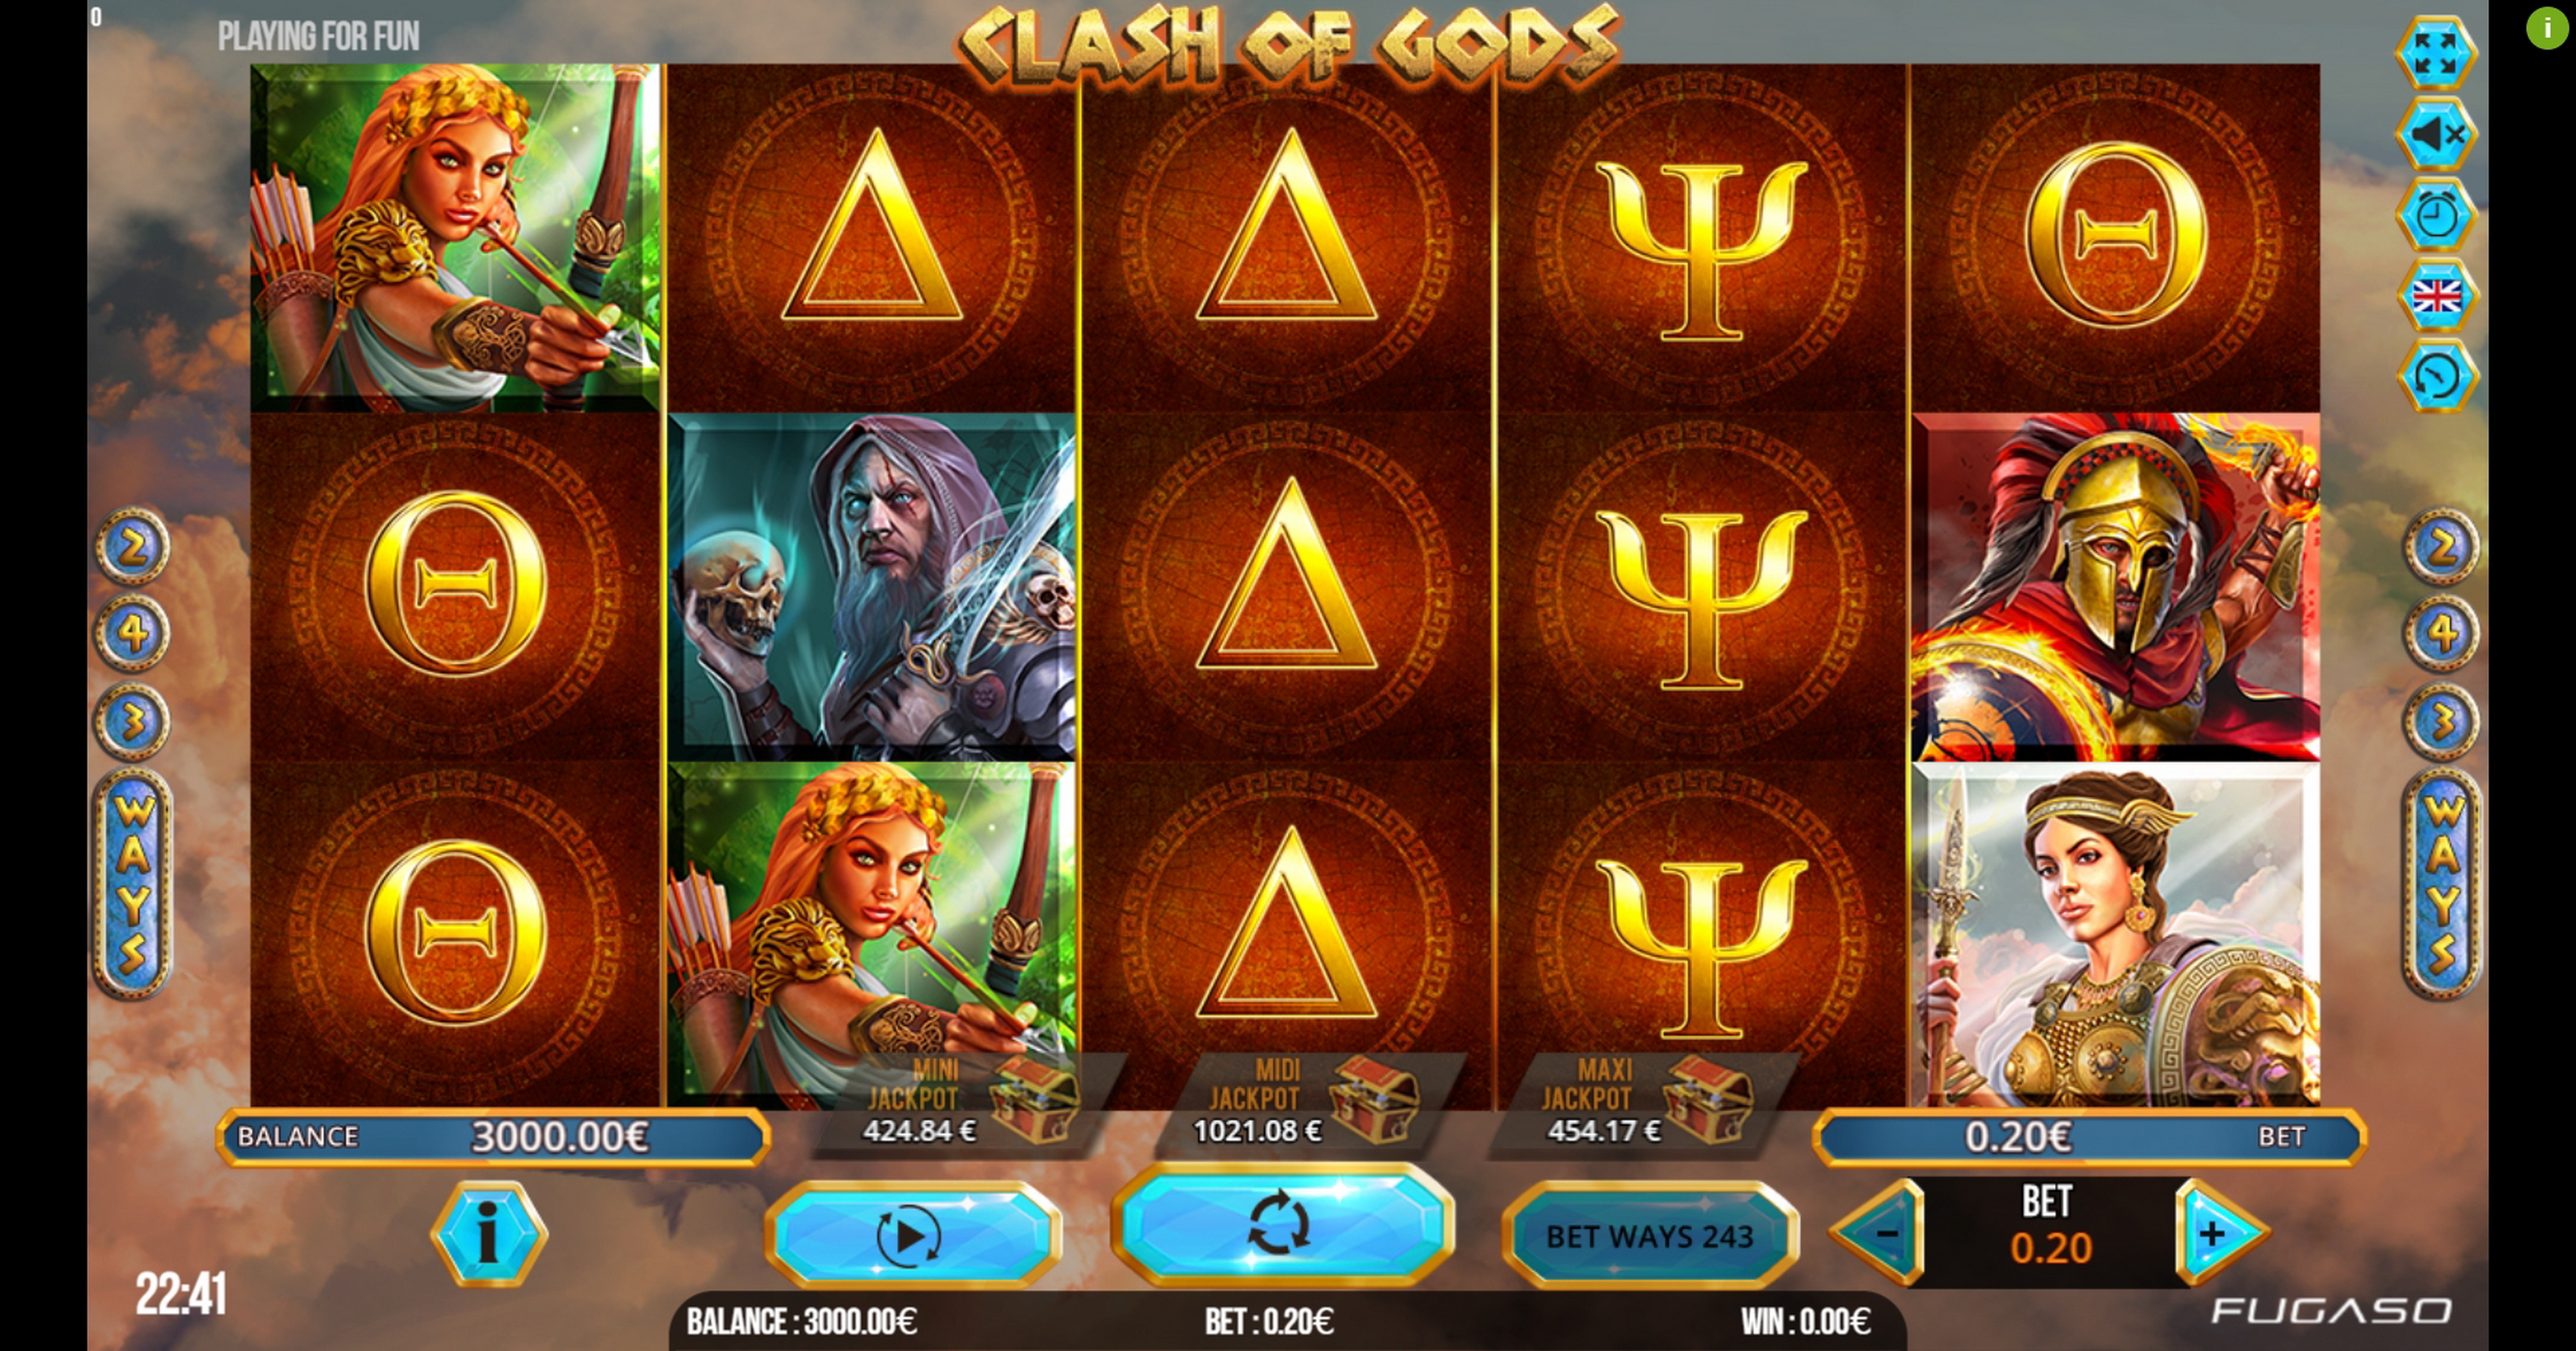 Reels in Clash of Gods Slot Game by Fugaso